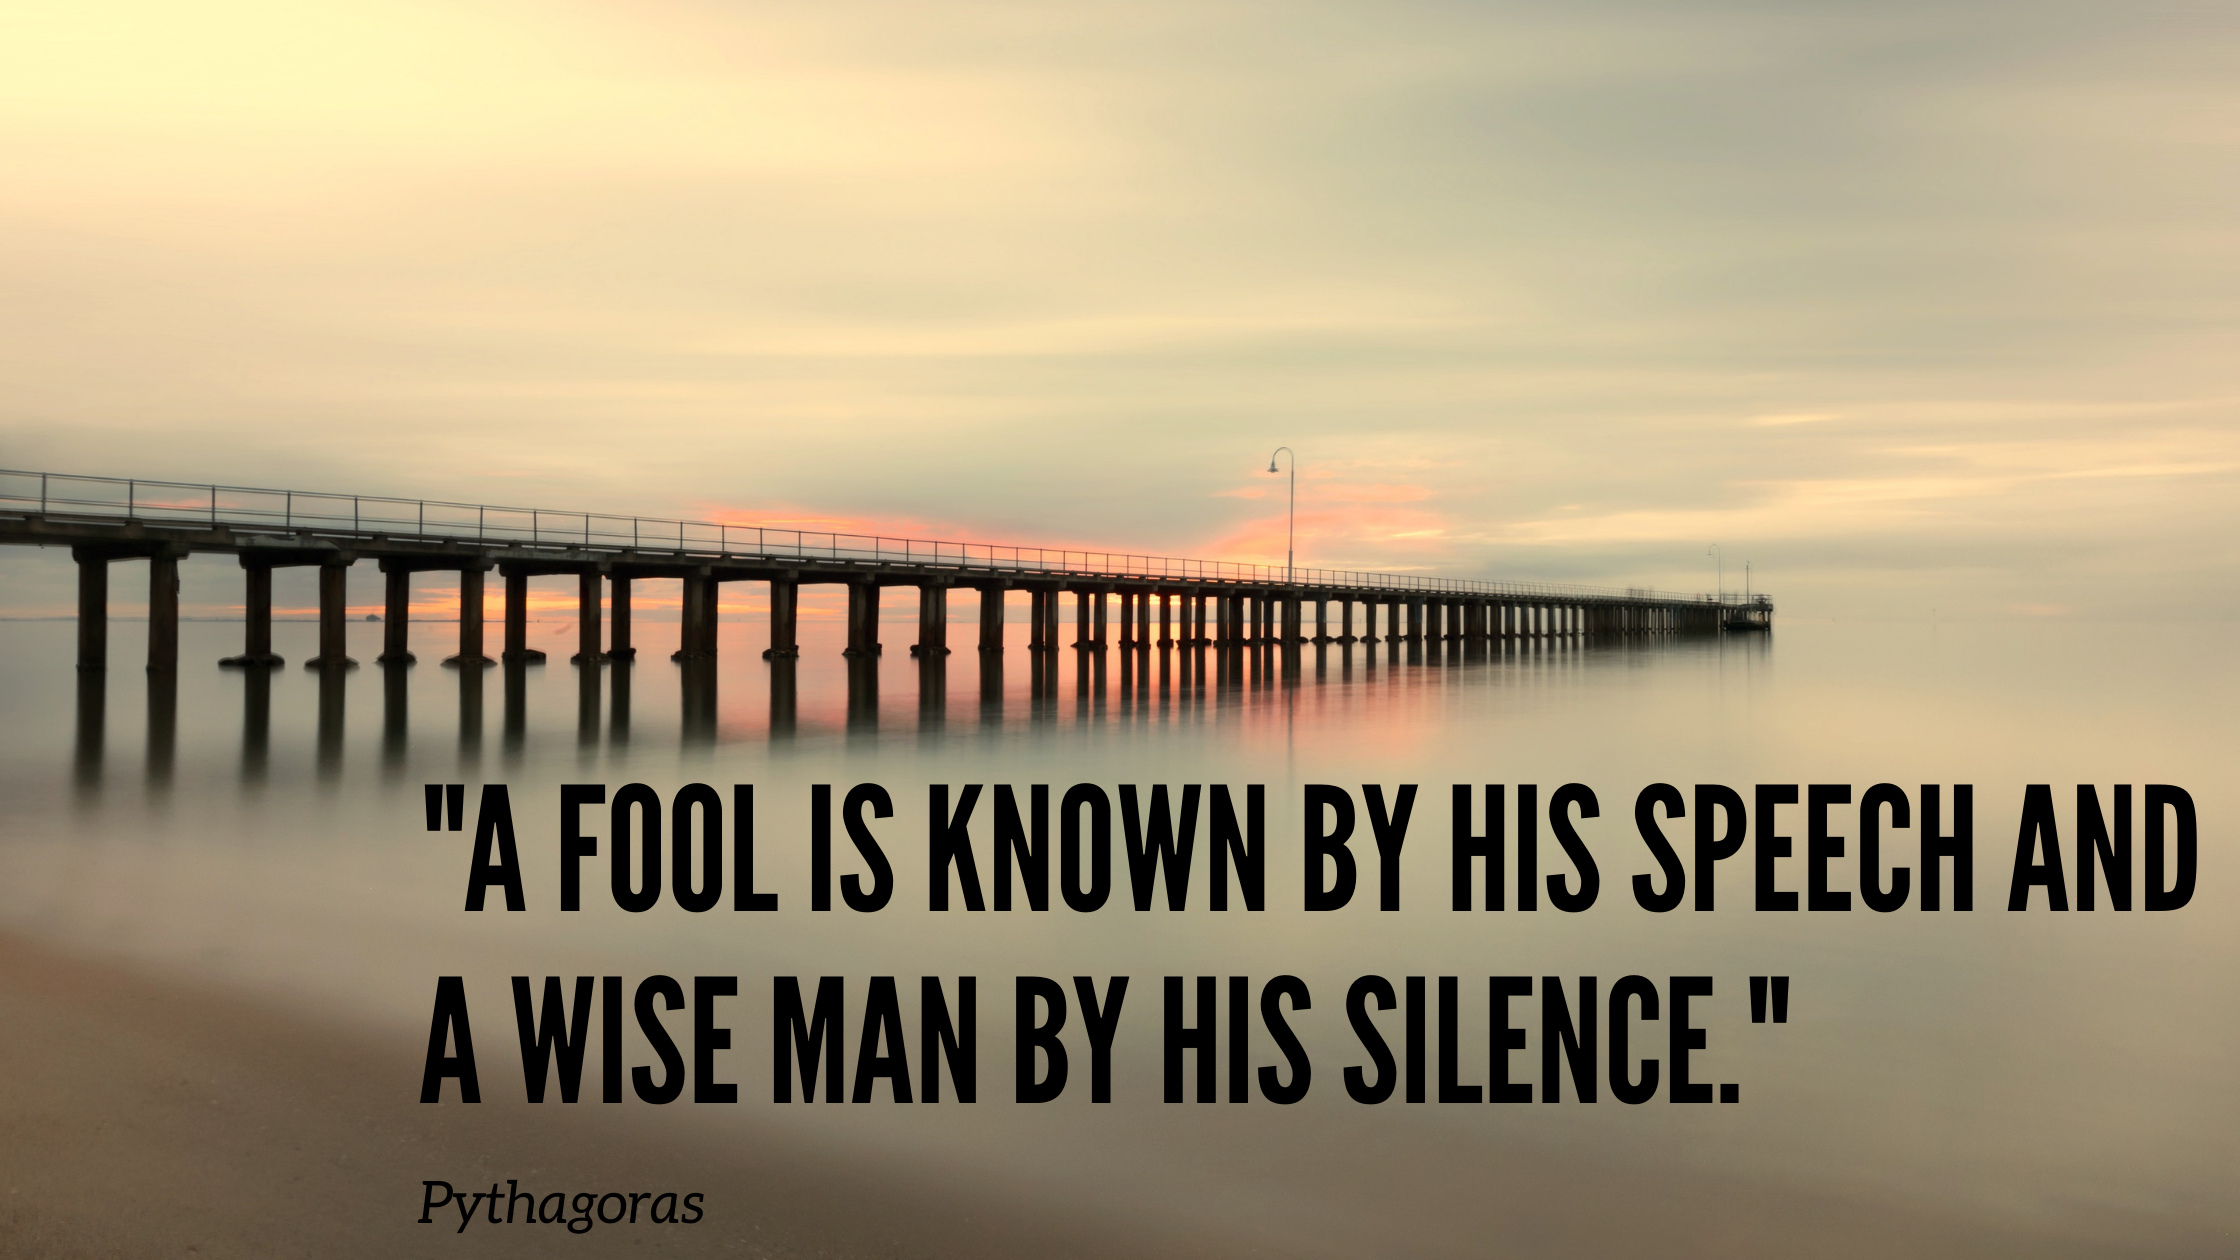 A fool is known by his speech and a wise man by his silence.